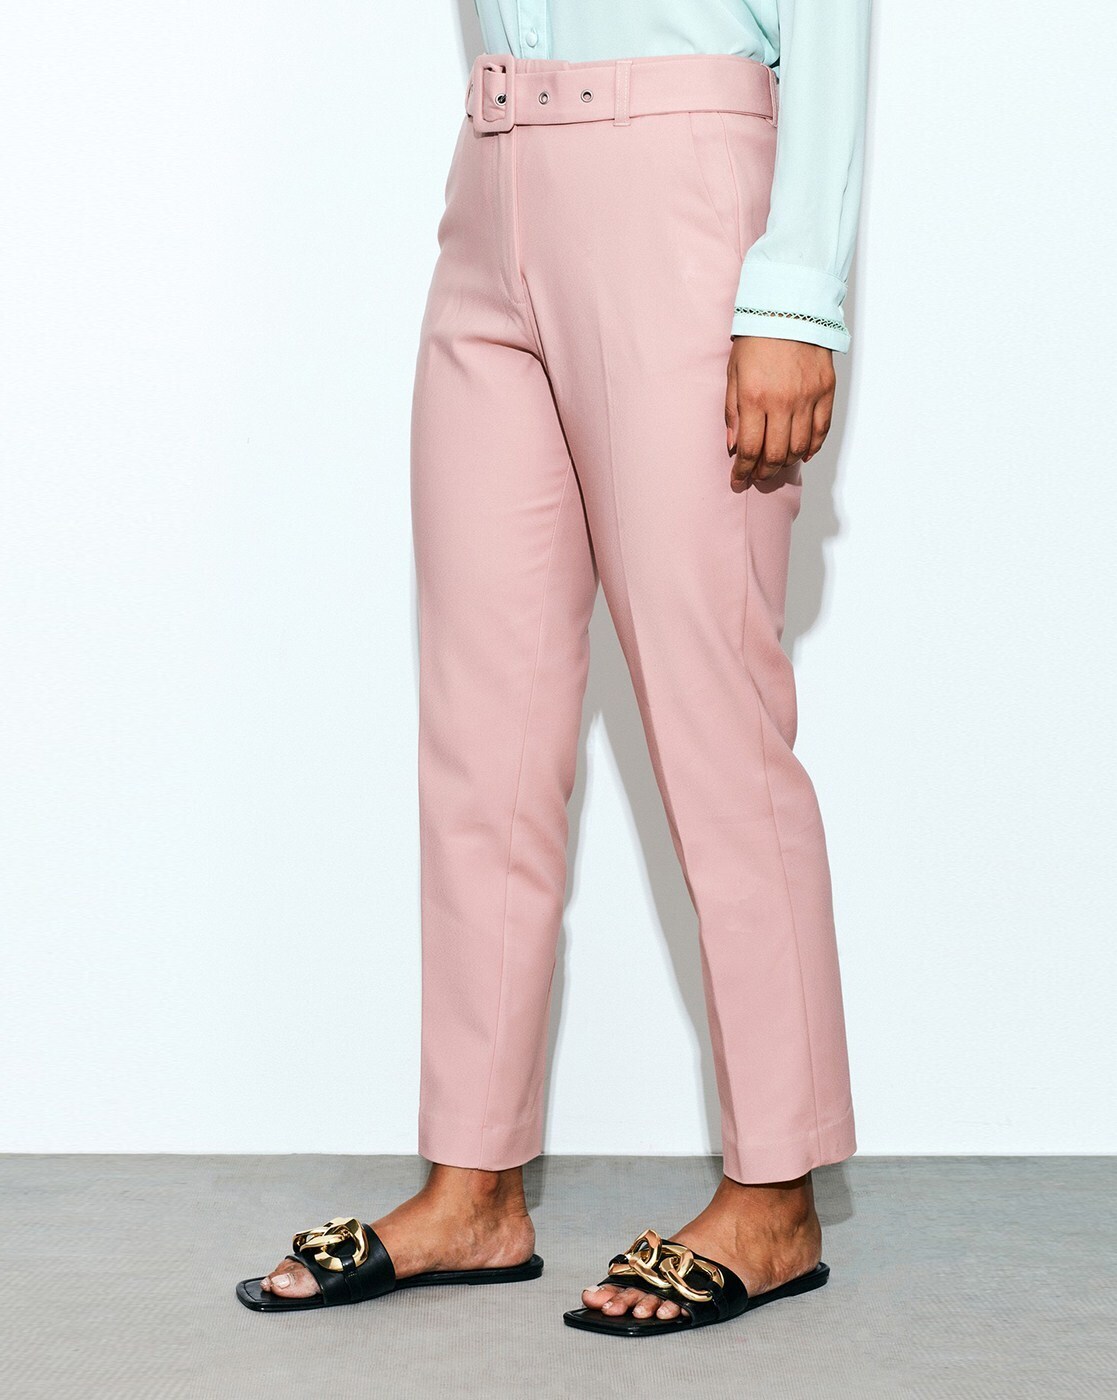 ZARA WOMAN New With Tag HIGH-WAISTED PANTS PINK TROUSERS Size SMALL | eBay